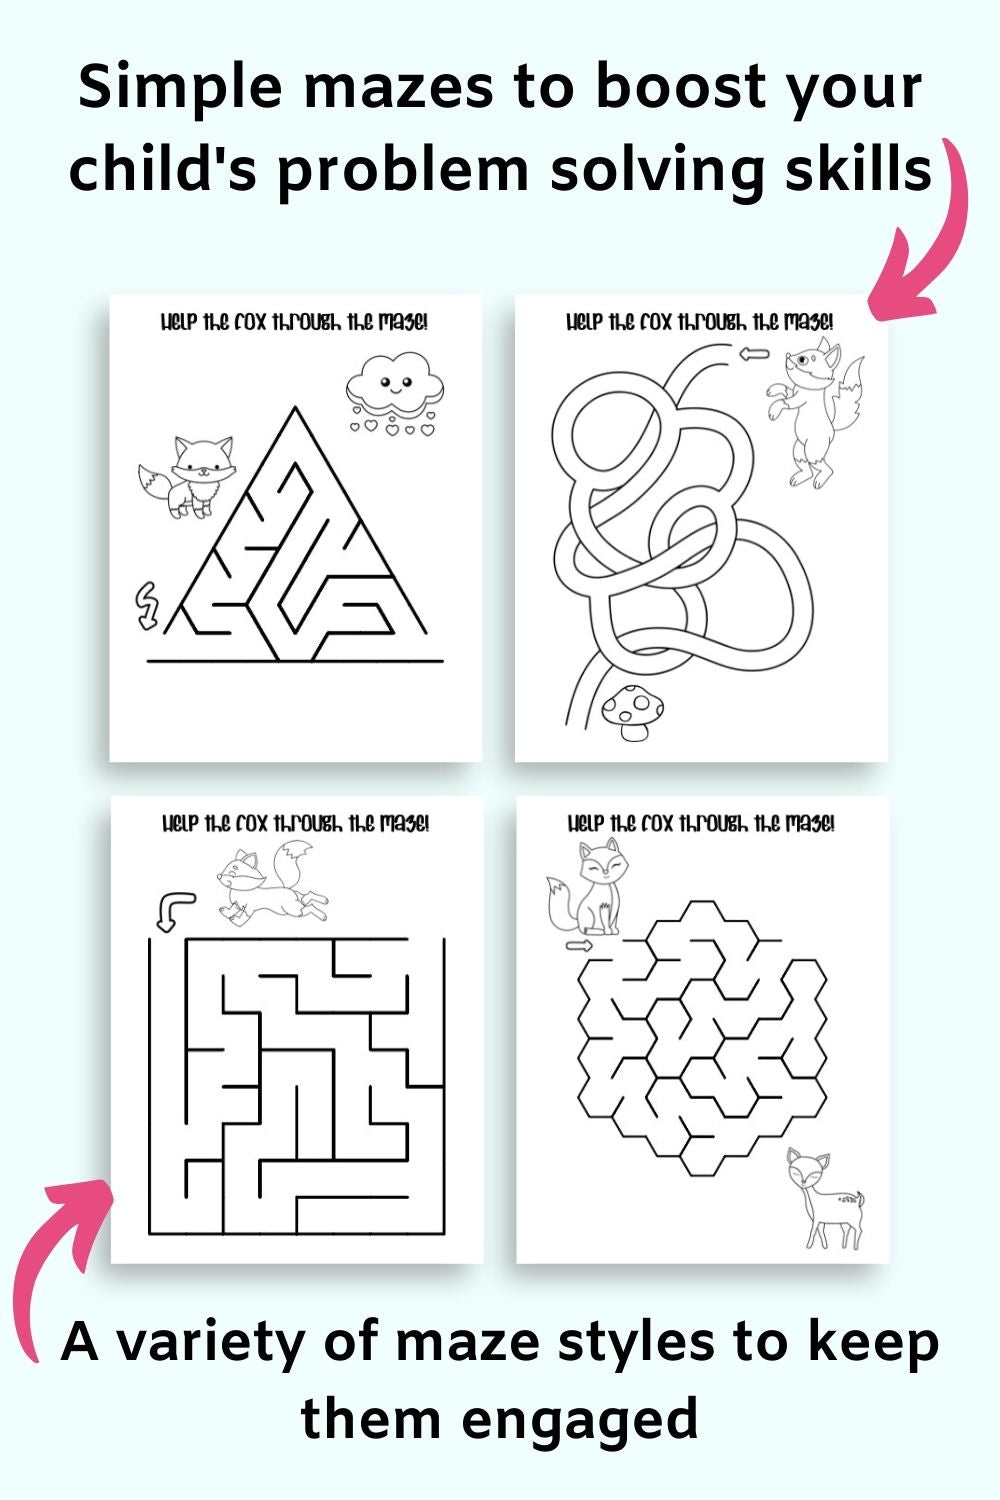 Text "simple mazes to boost your child's problem solving skills" and "a variety of mazes style to keep them engaged" with a preview of four easy mazes